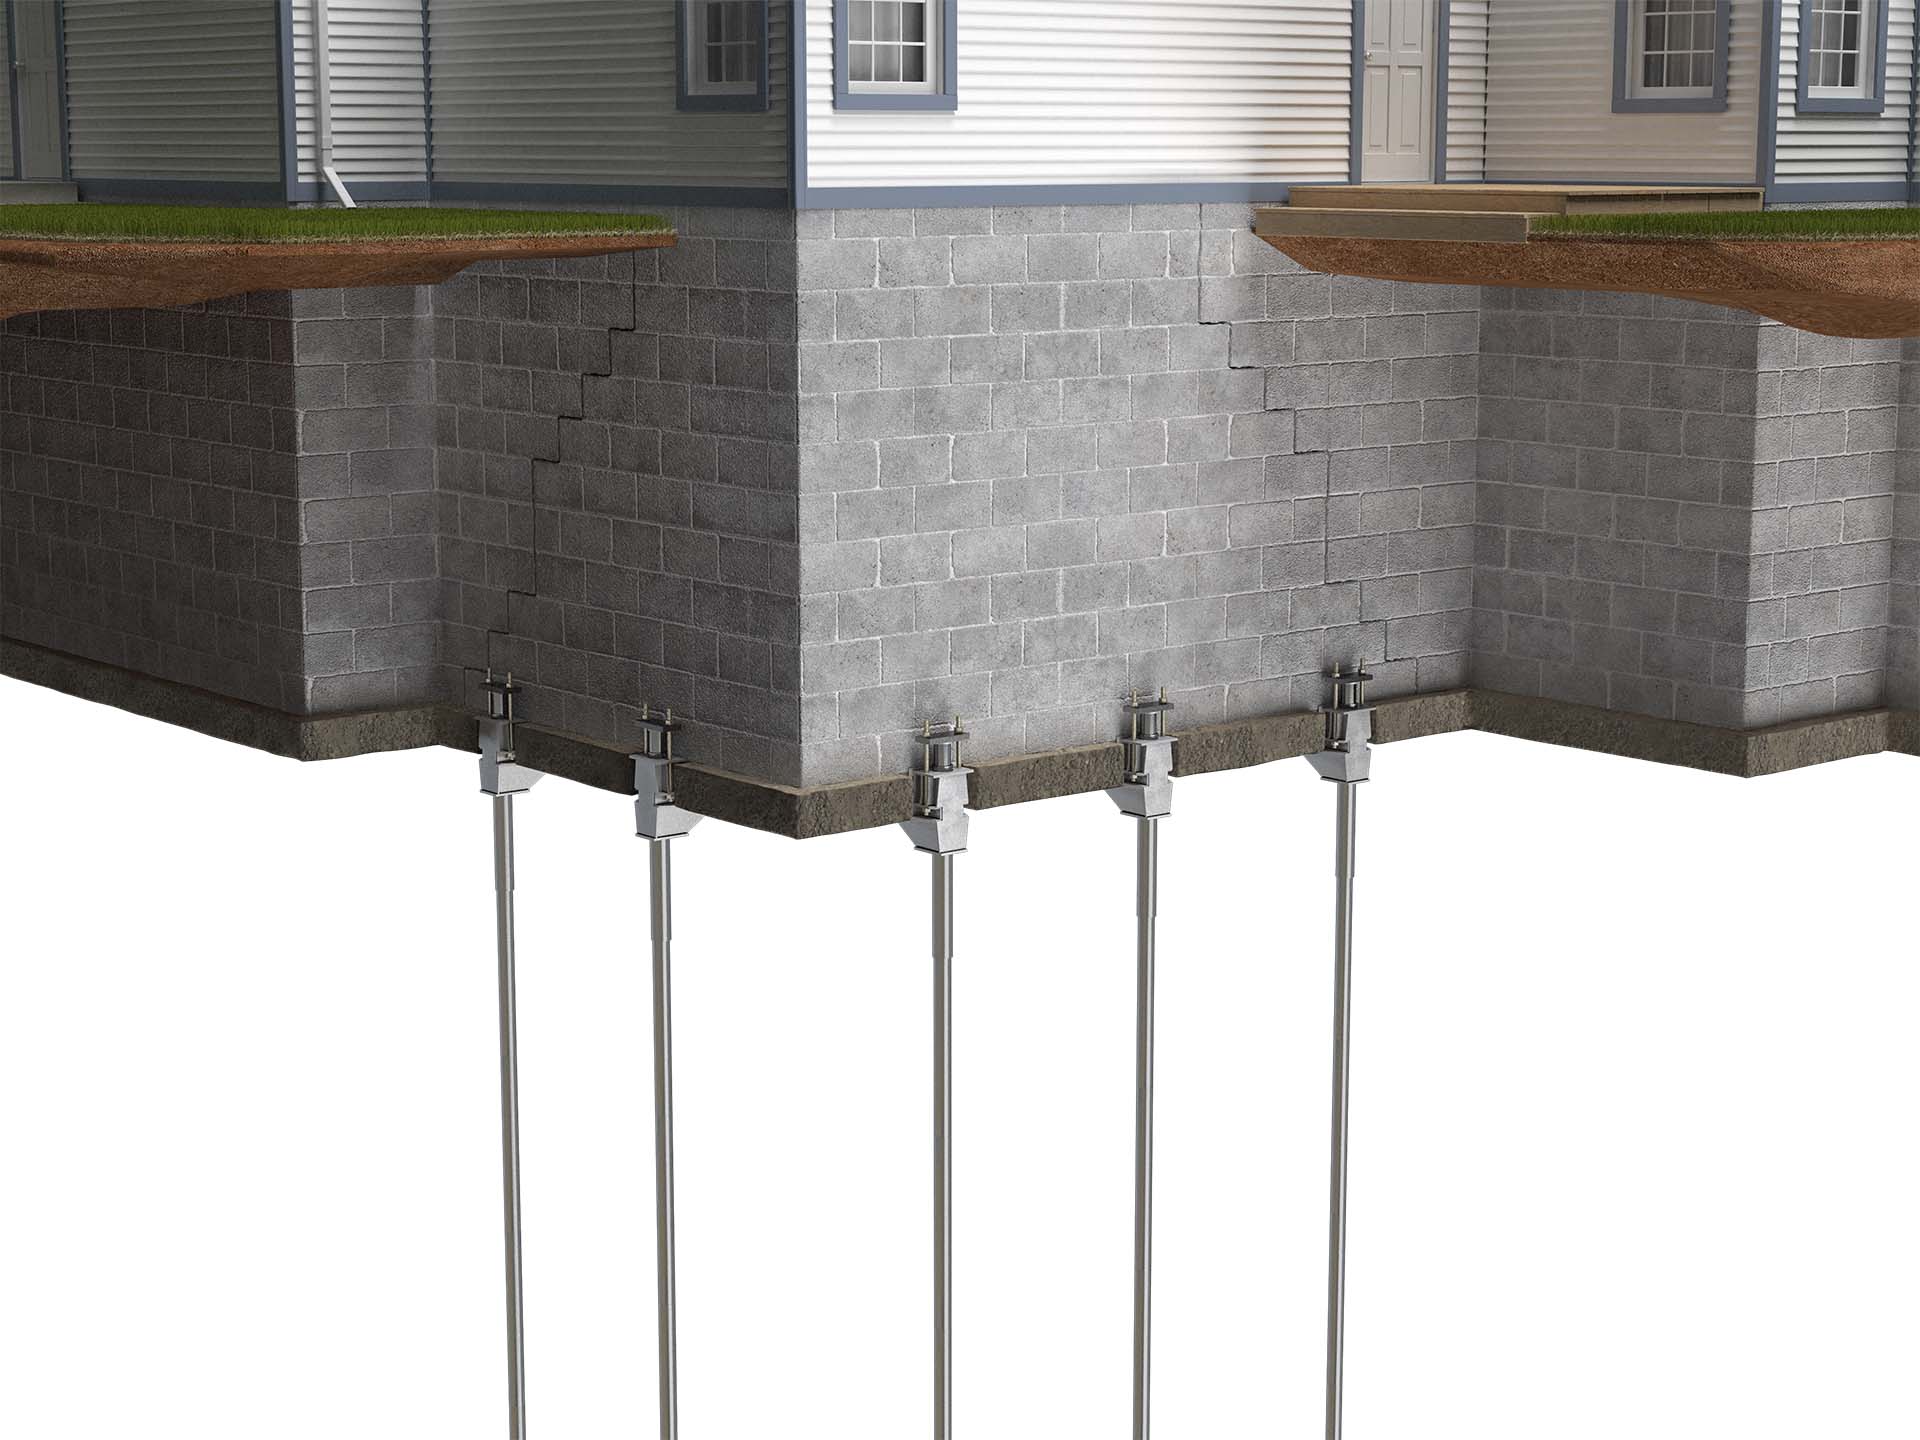 push pier systems in home foundation cross section